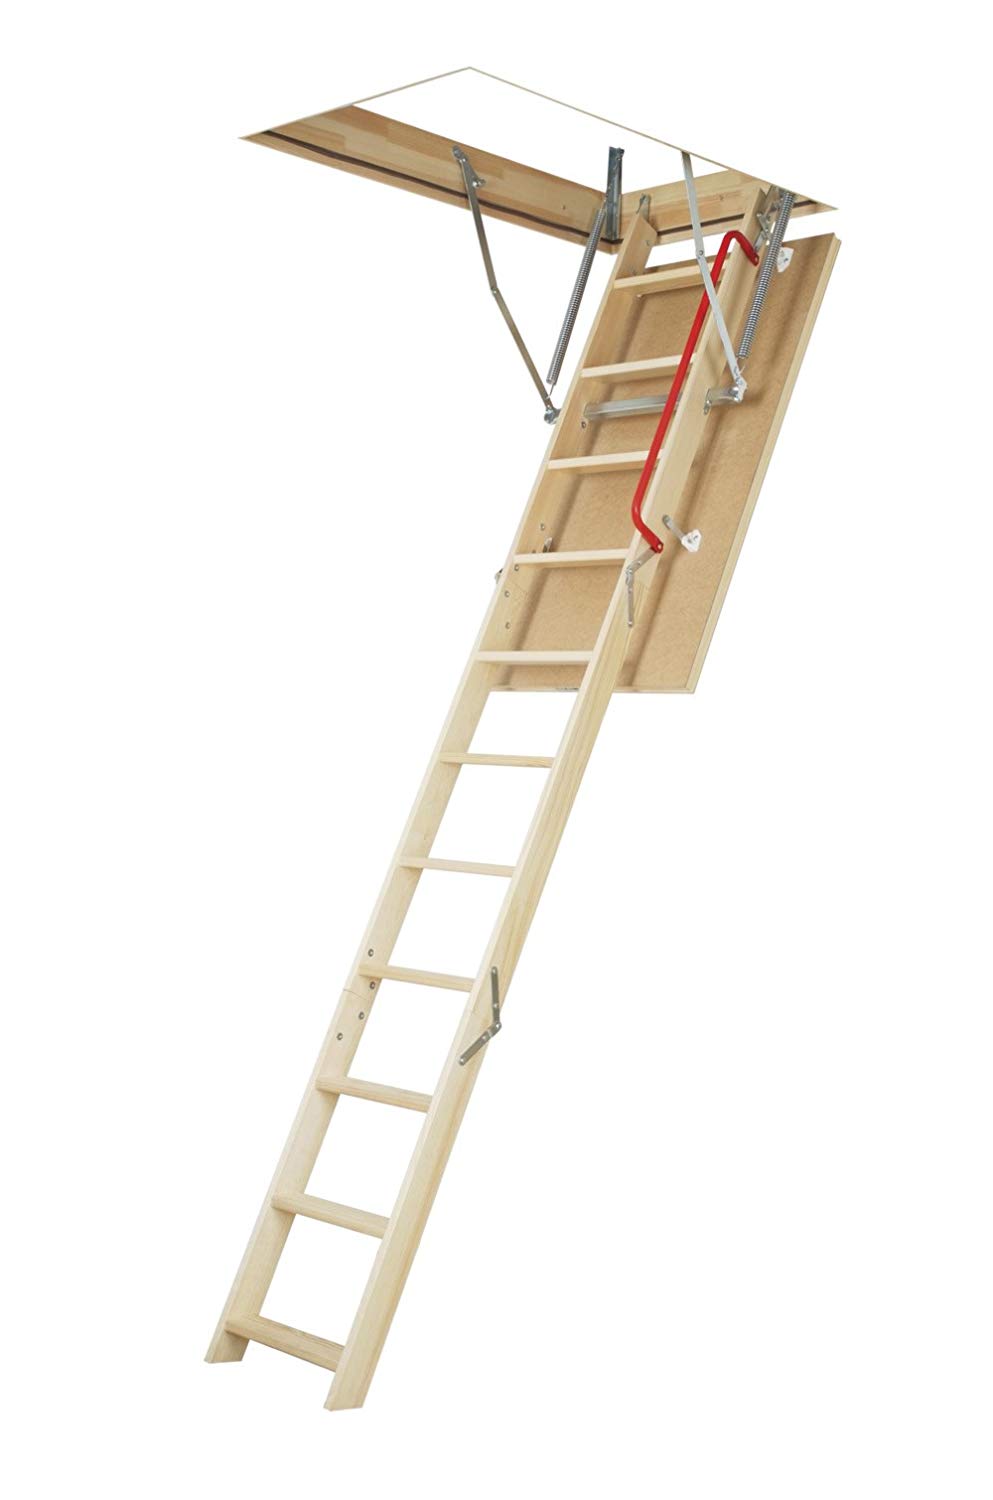 Top 10 Attic Ladders in 2021 Highly in 2021